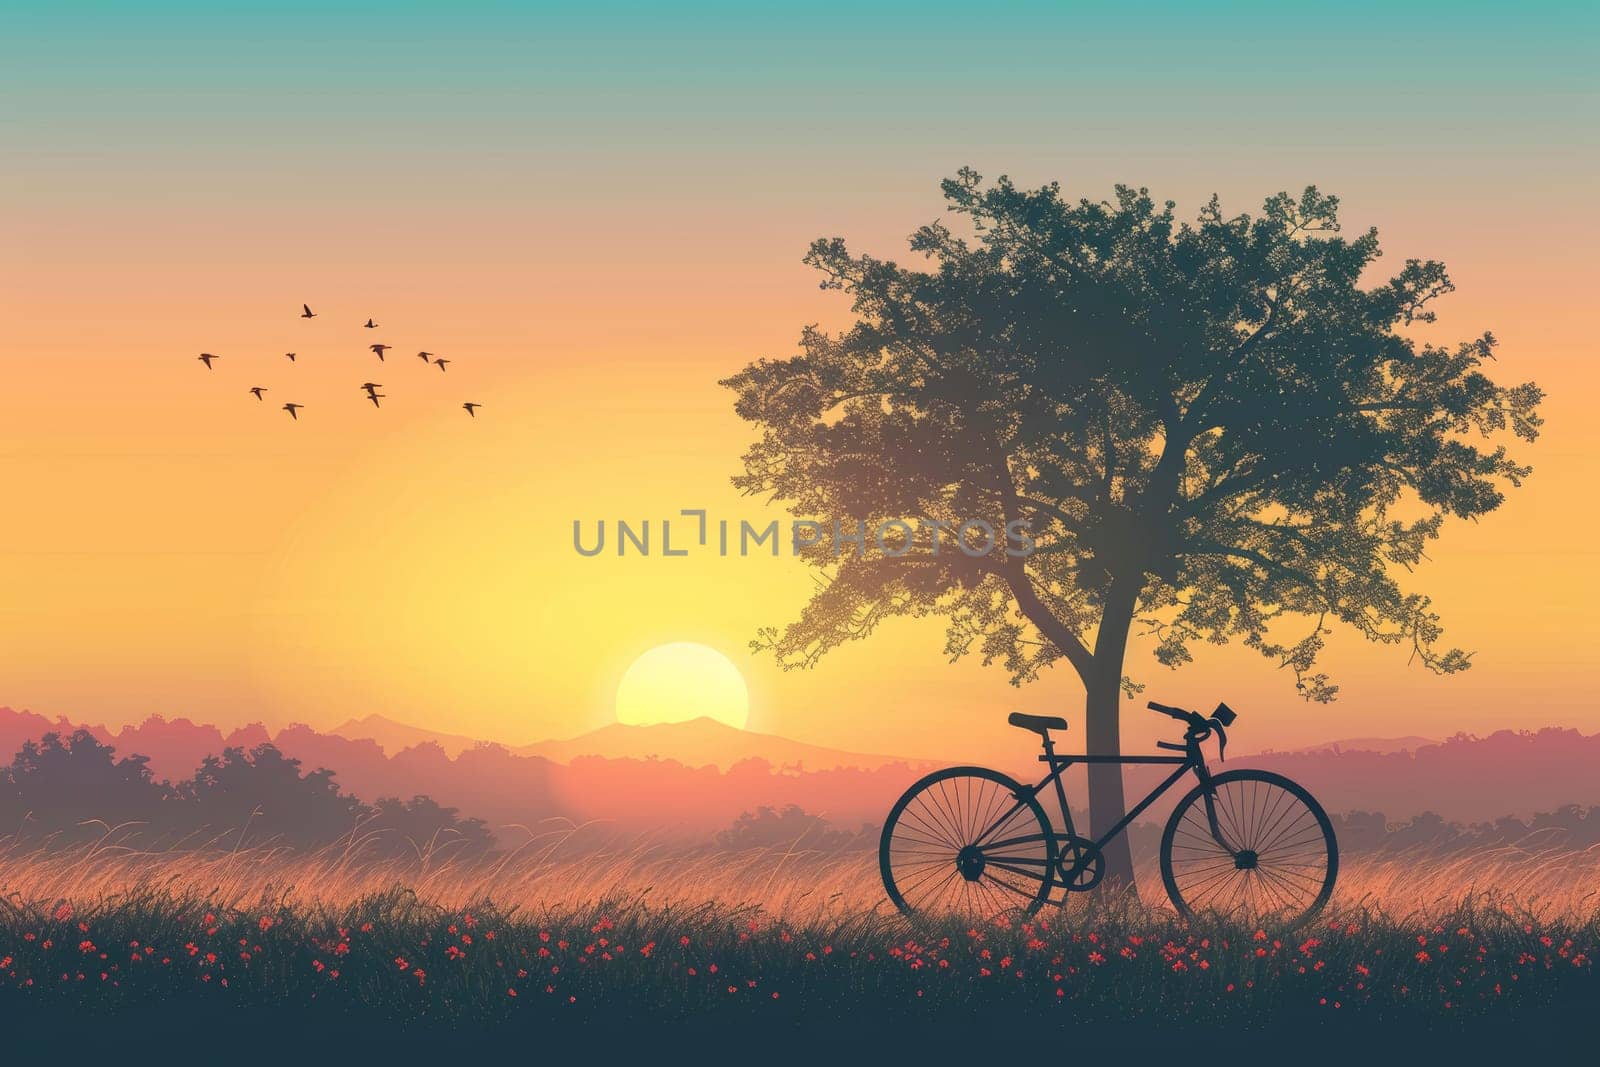 Serene Sunset Bicycle Scene by andreyz